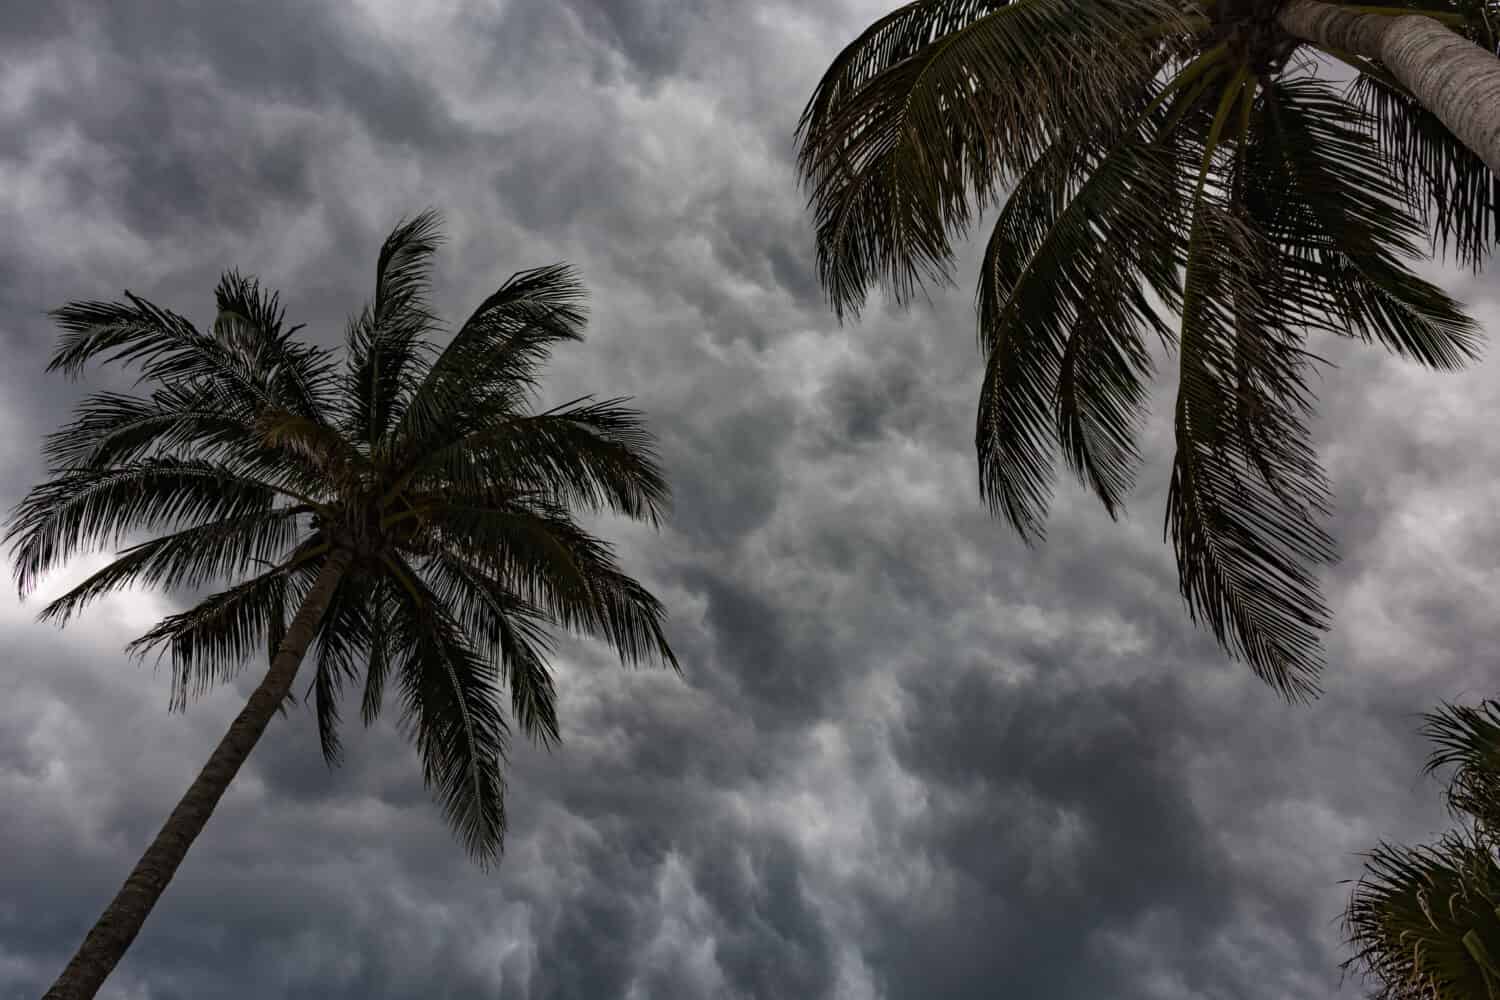 Ominous dark clouds backdrop cocoanut palm trees as severe storms near the coast.